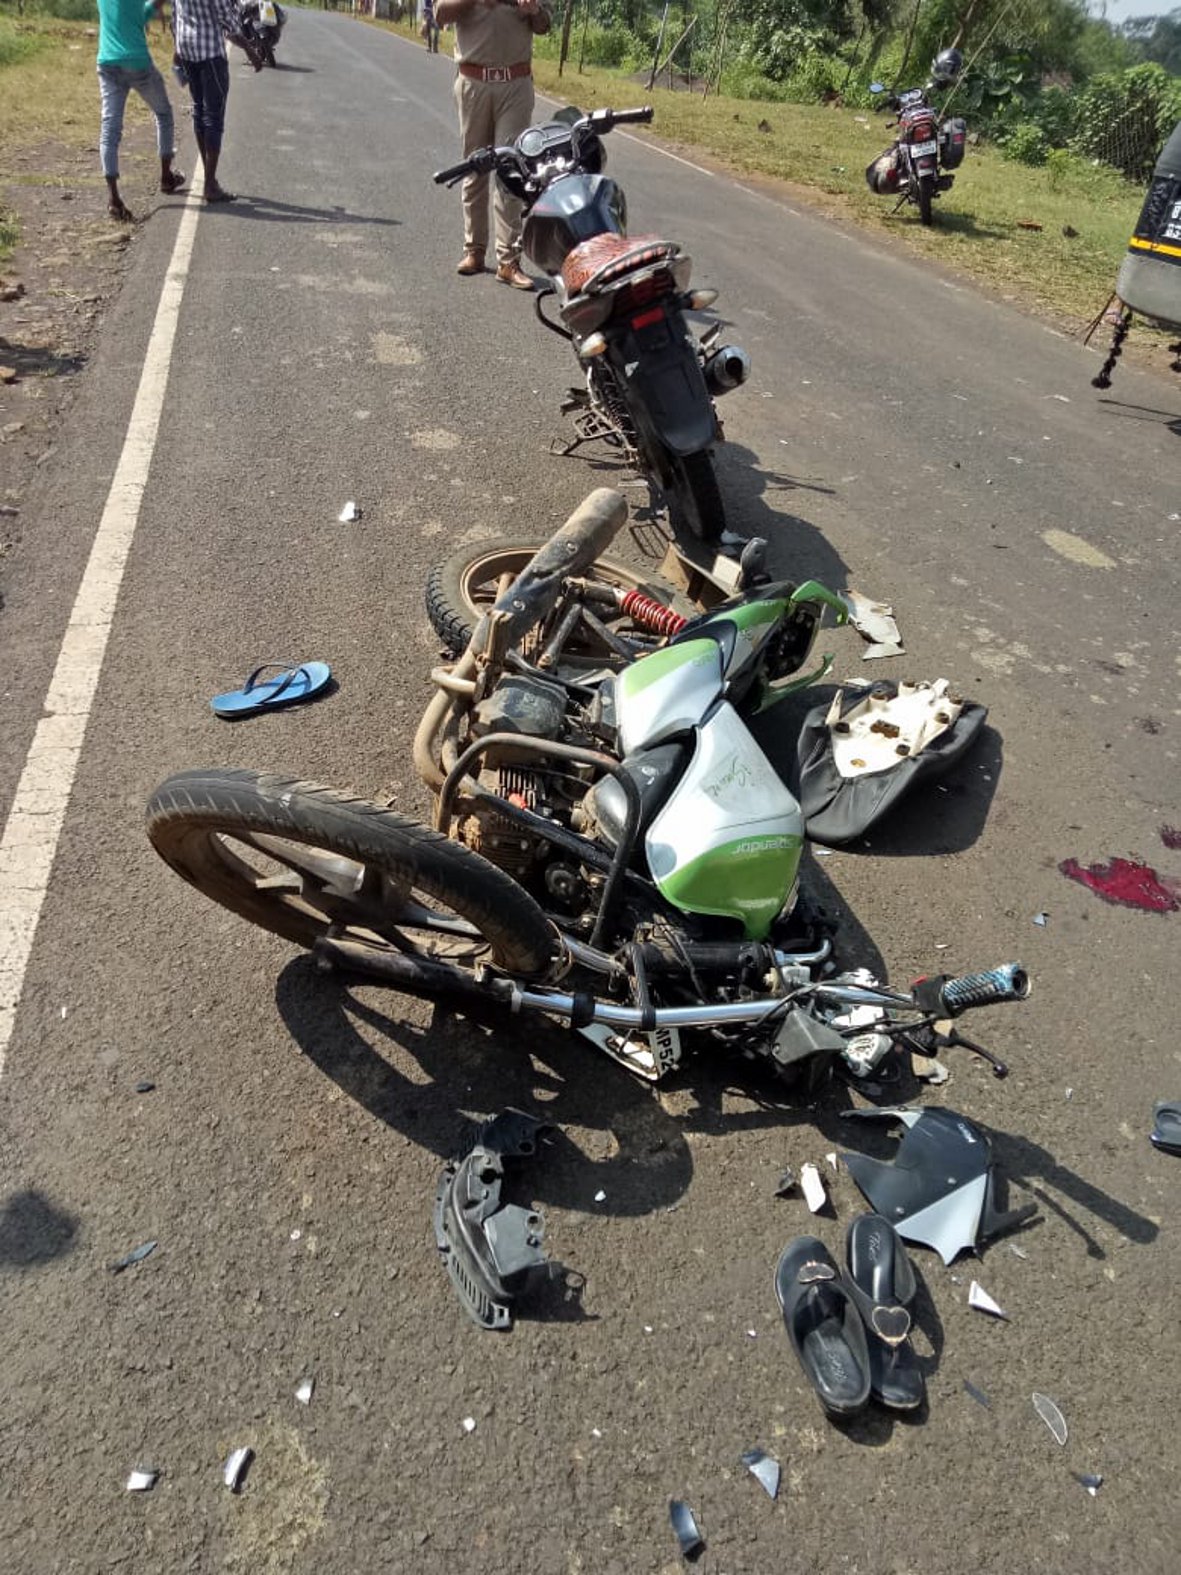 Five injured in motorcycle collision